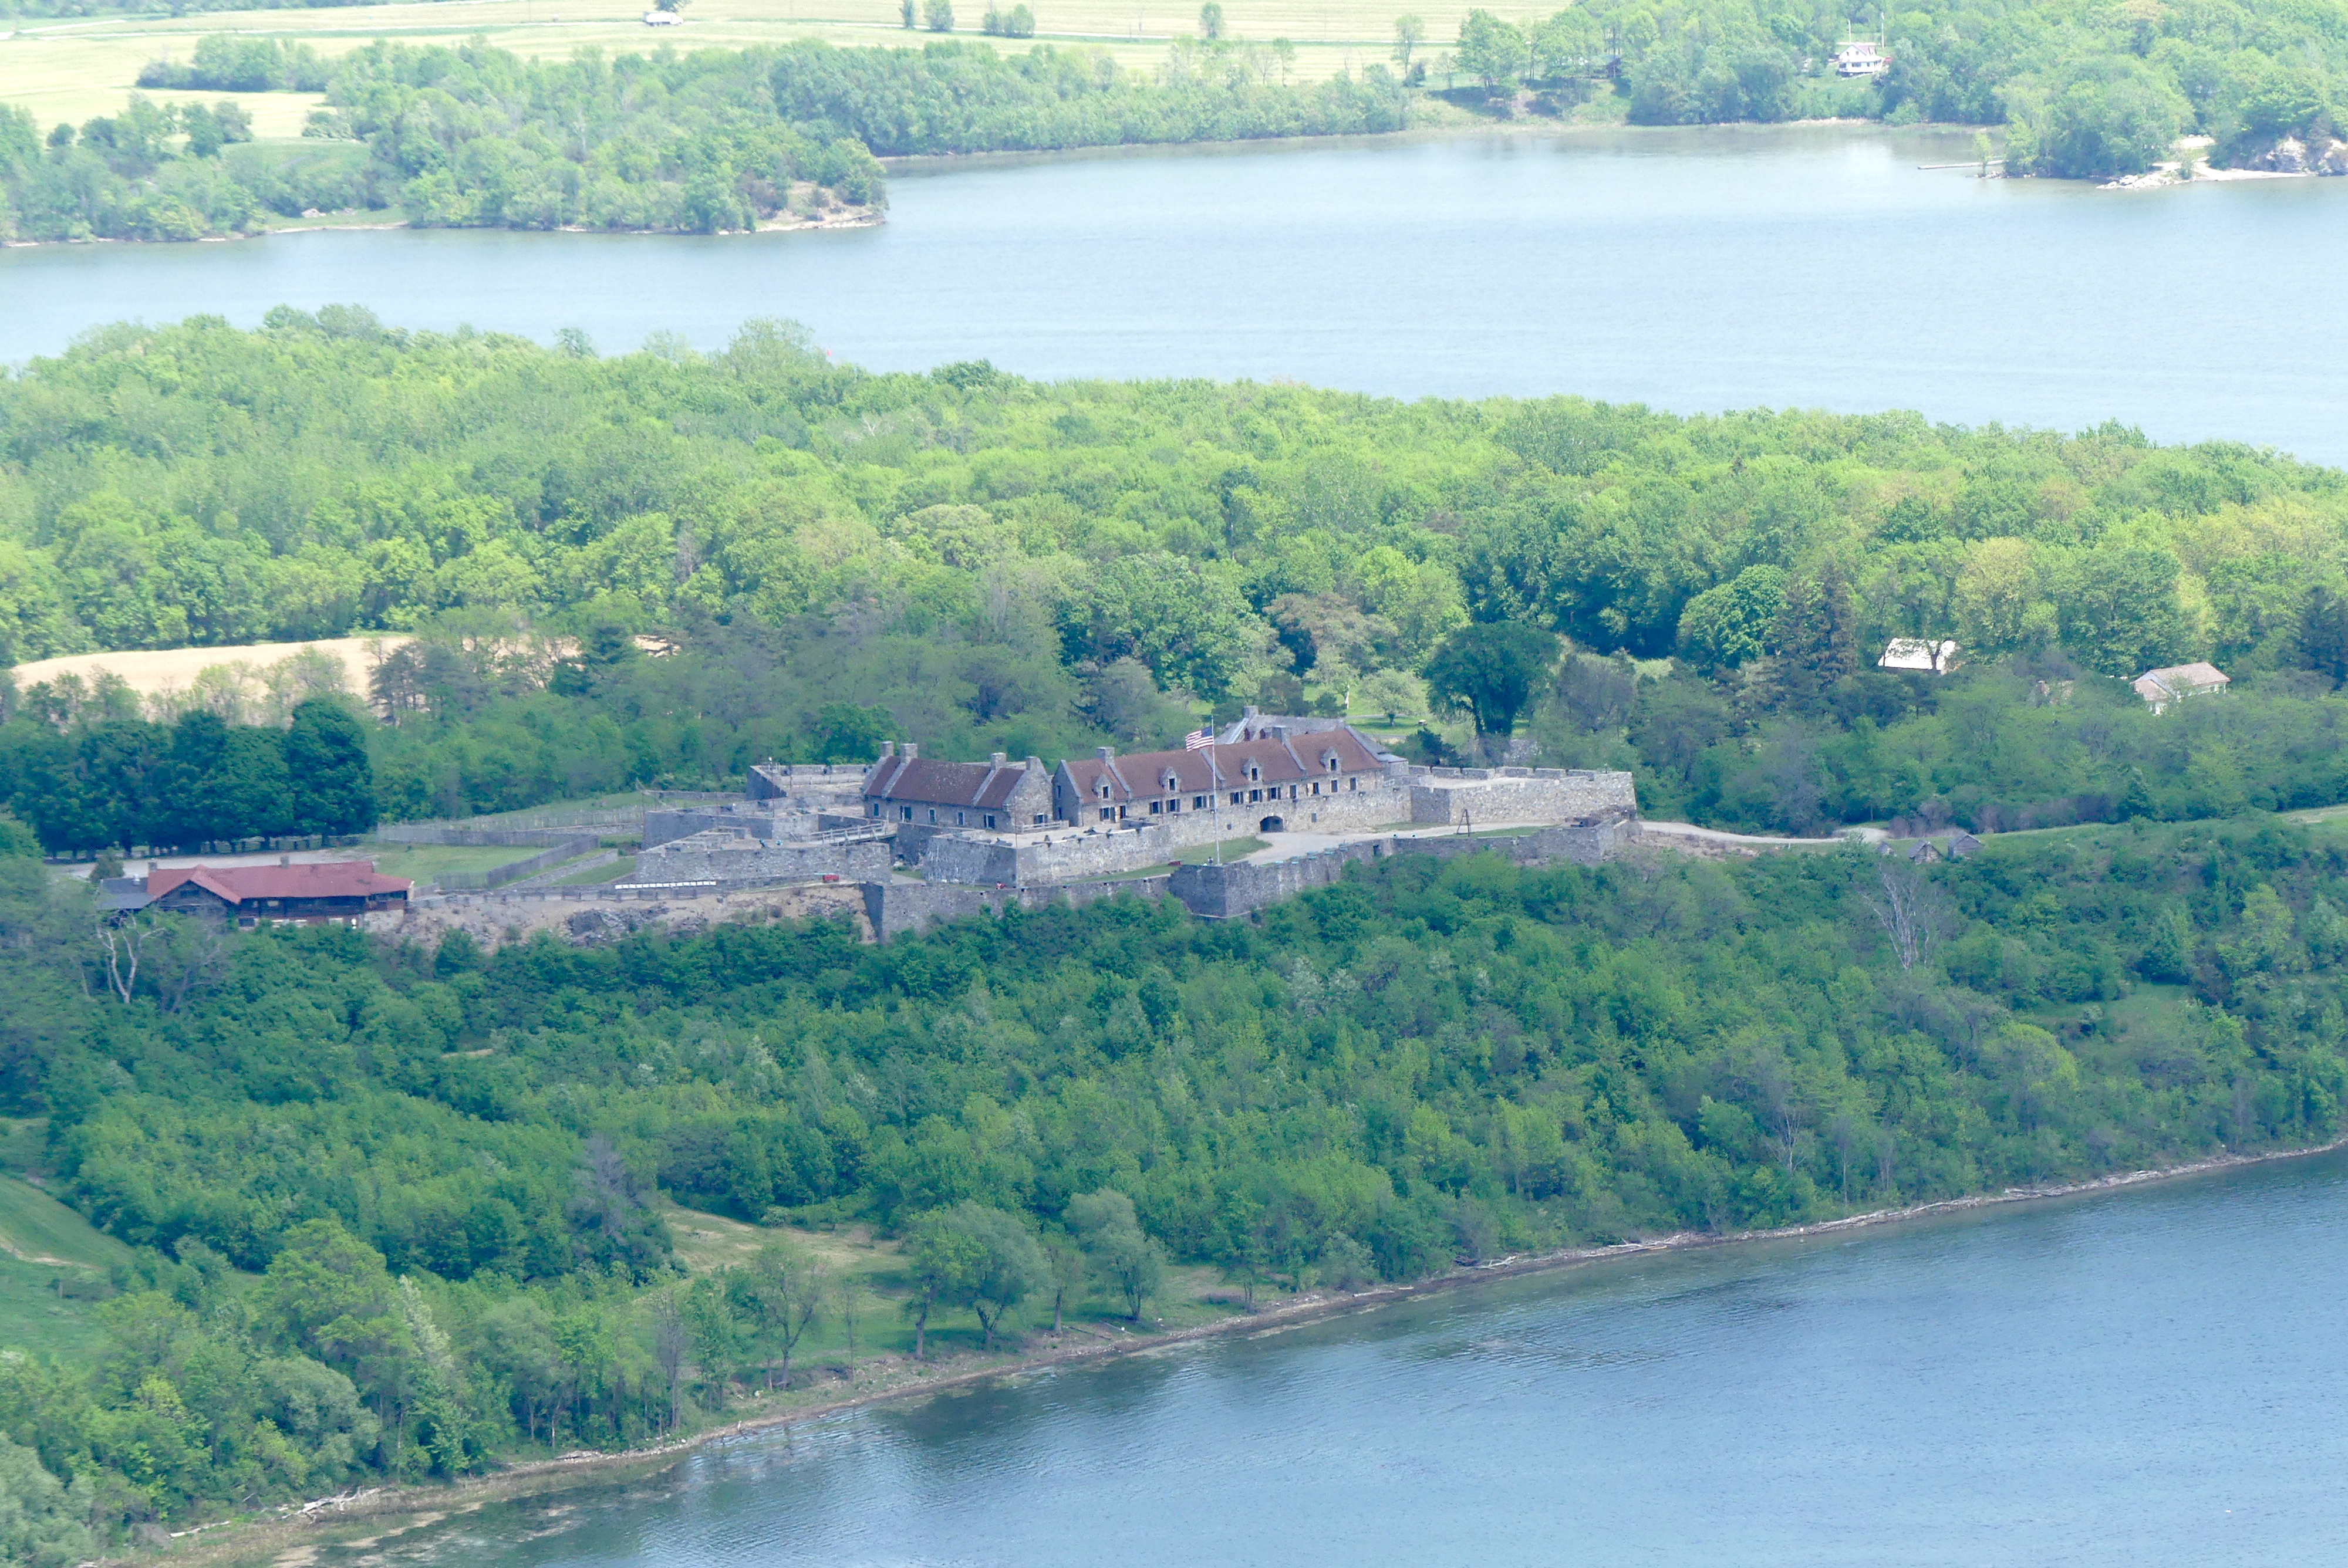 Fort Ticonderoga as it appears from Mount Defiance